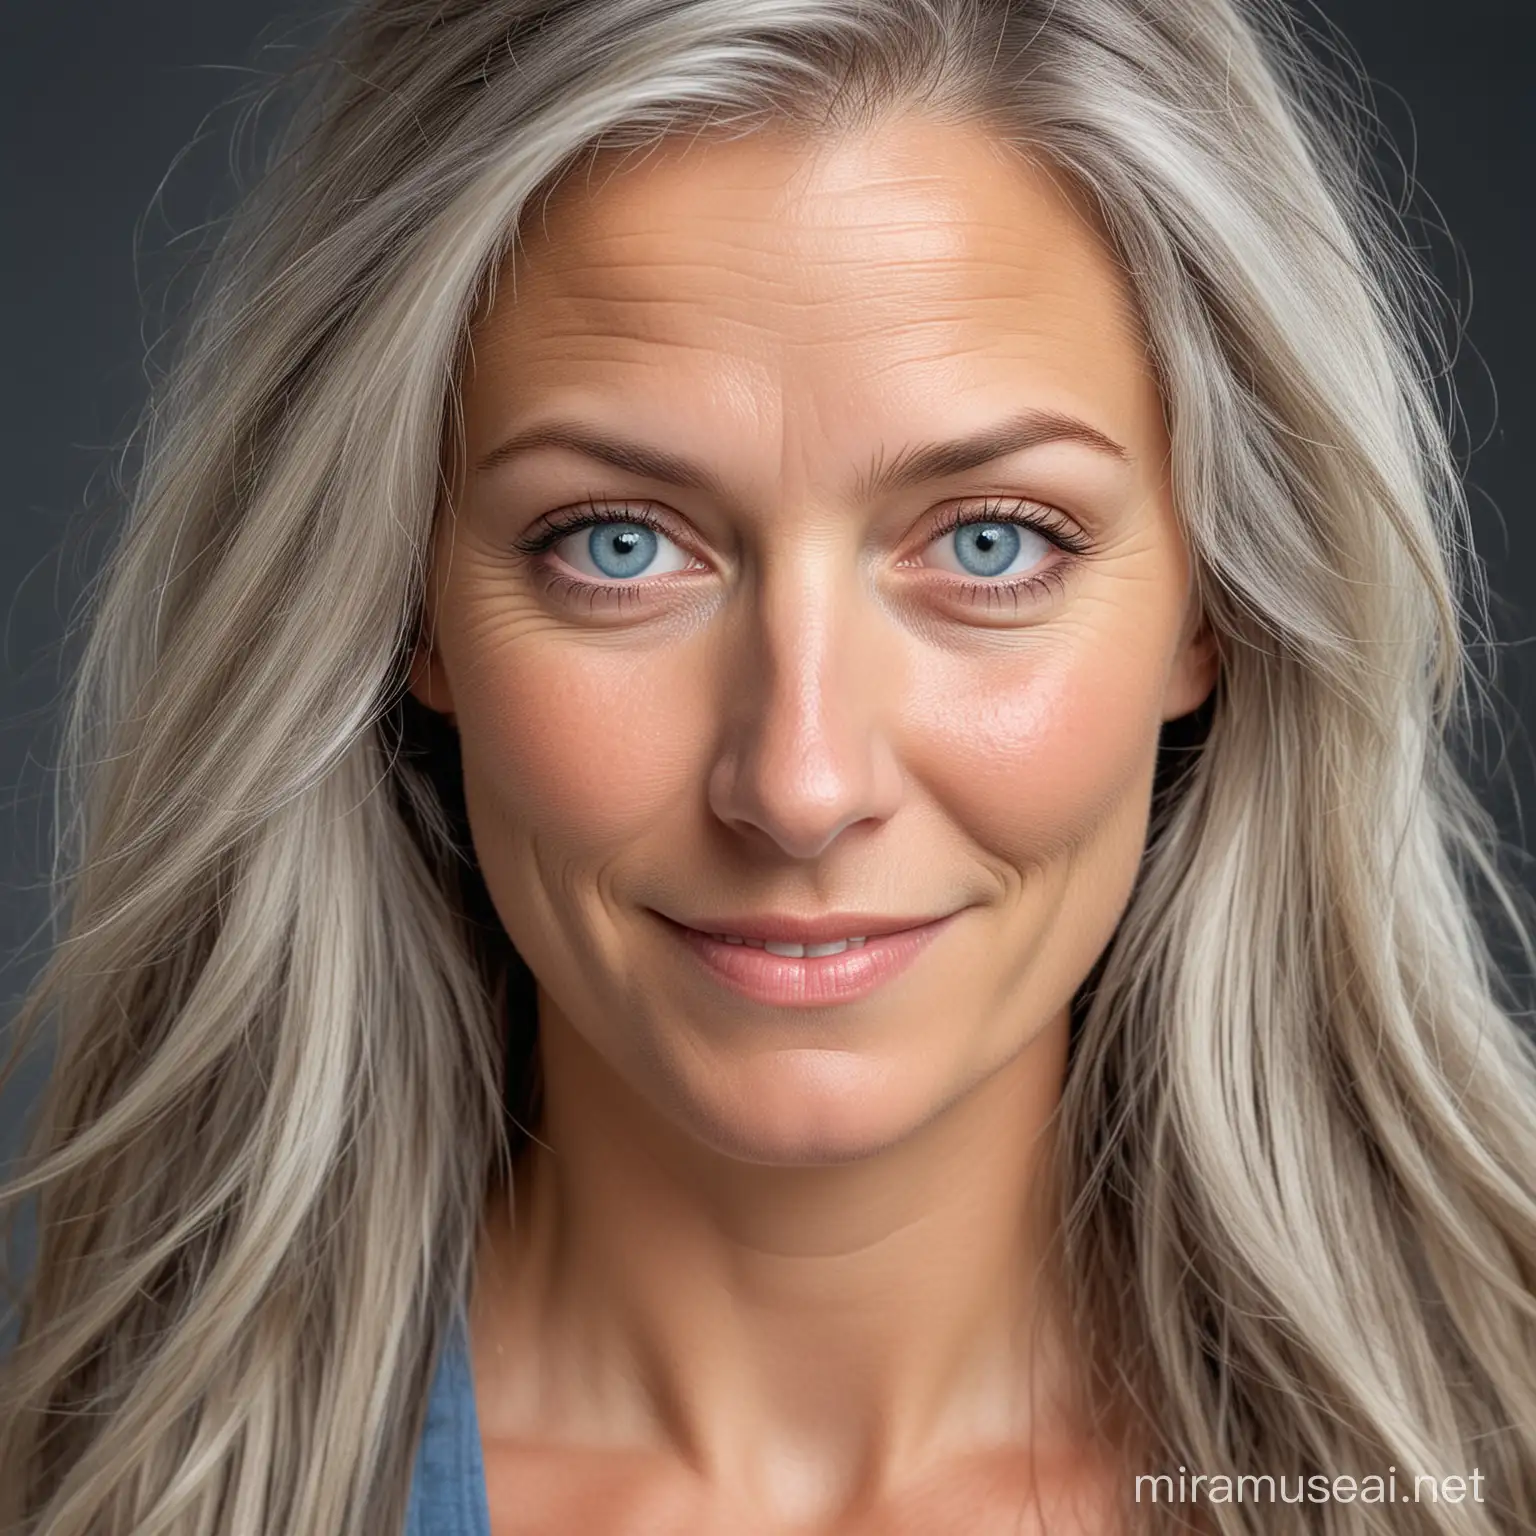 Create an image of a 44 year old woman. Her long hair is graying. She has blue eyes. She looks a bit tired but has a cheeky grin. She has high cheekbones and plump cheeks.